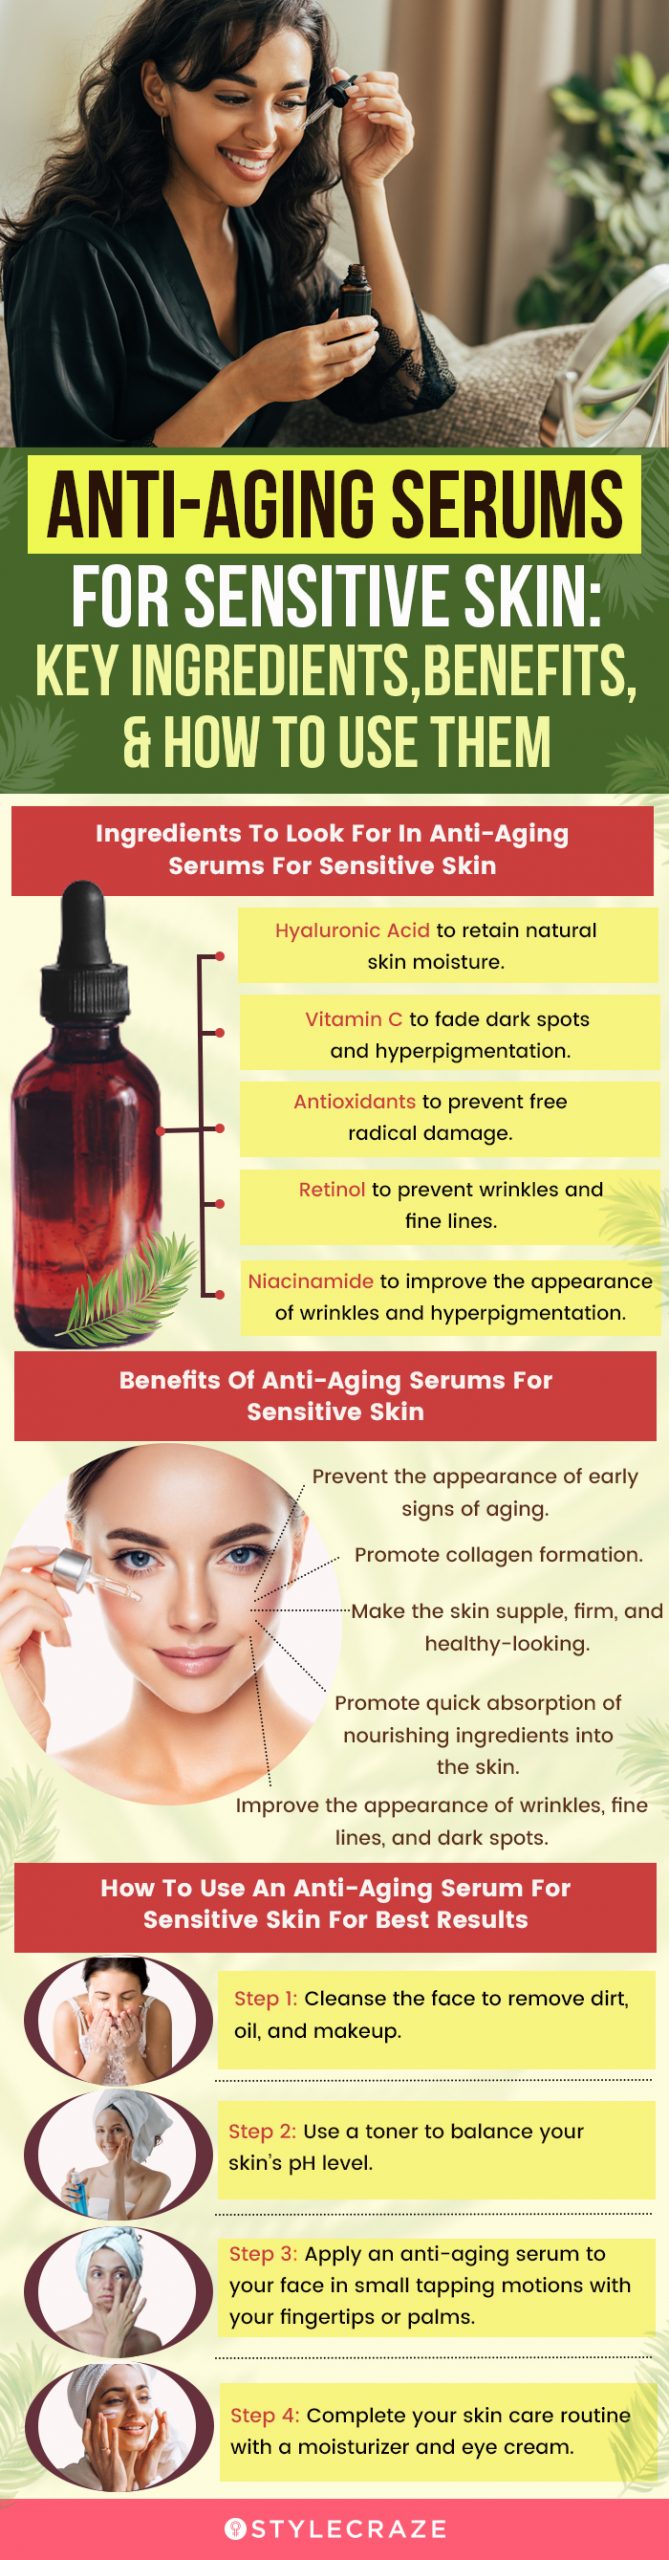 Anti-Aging Serums For Sensitive Skin (infographic)